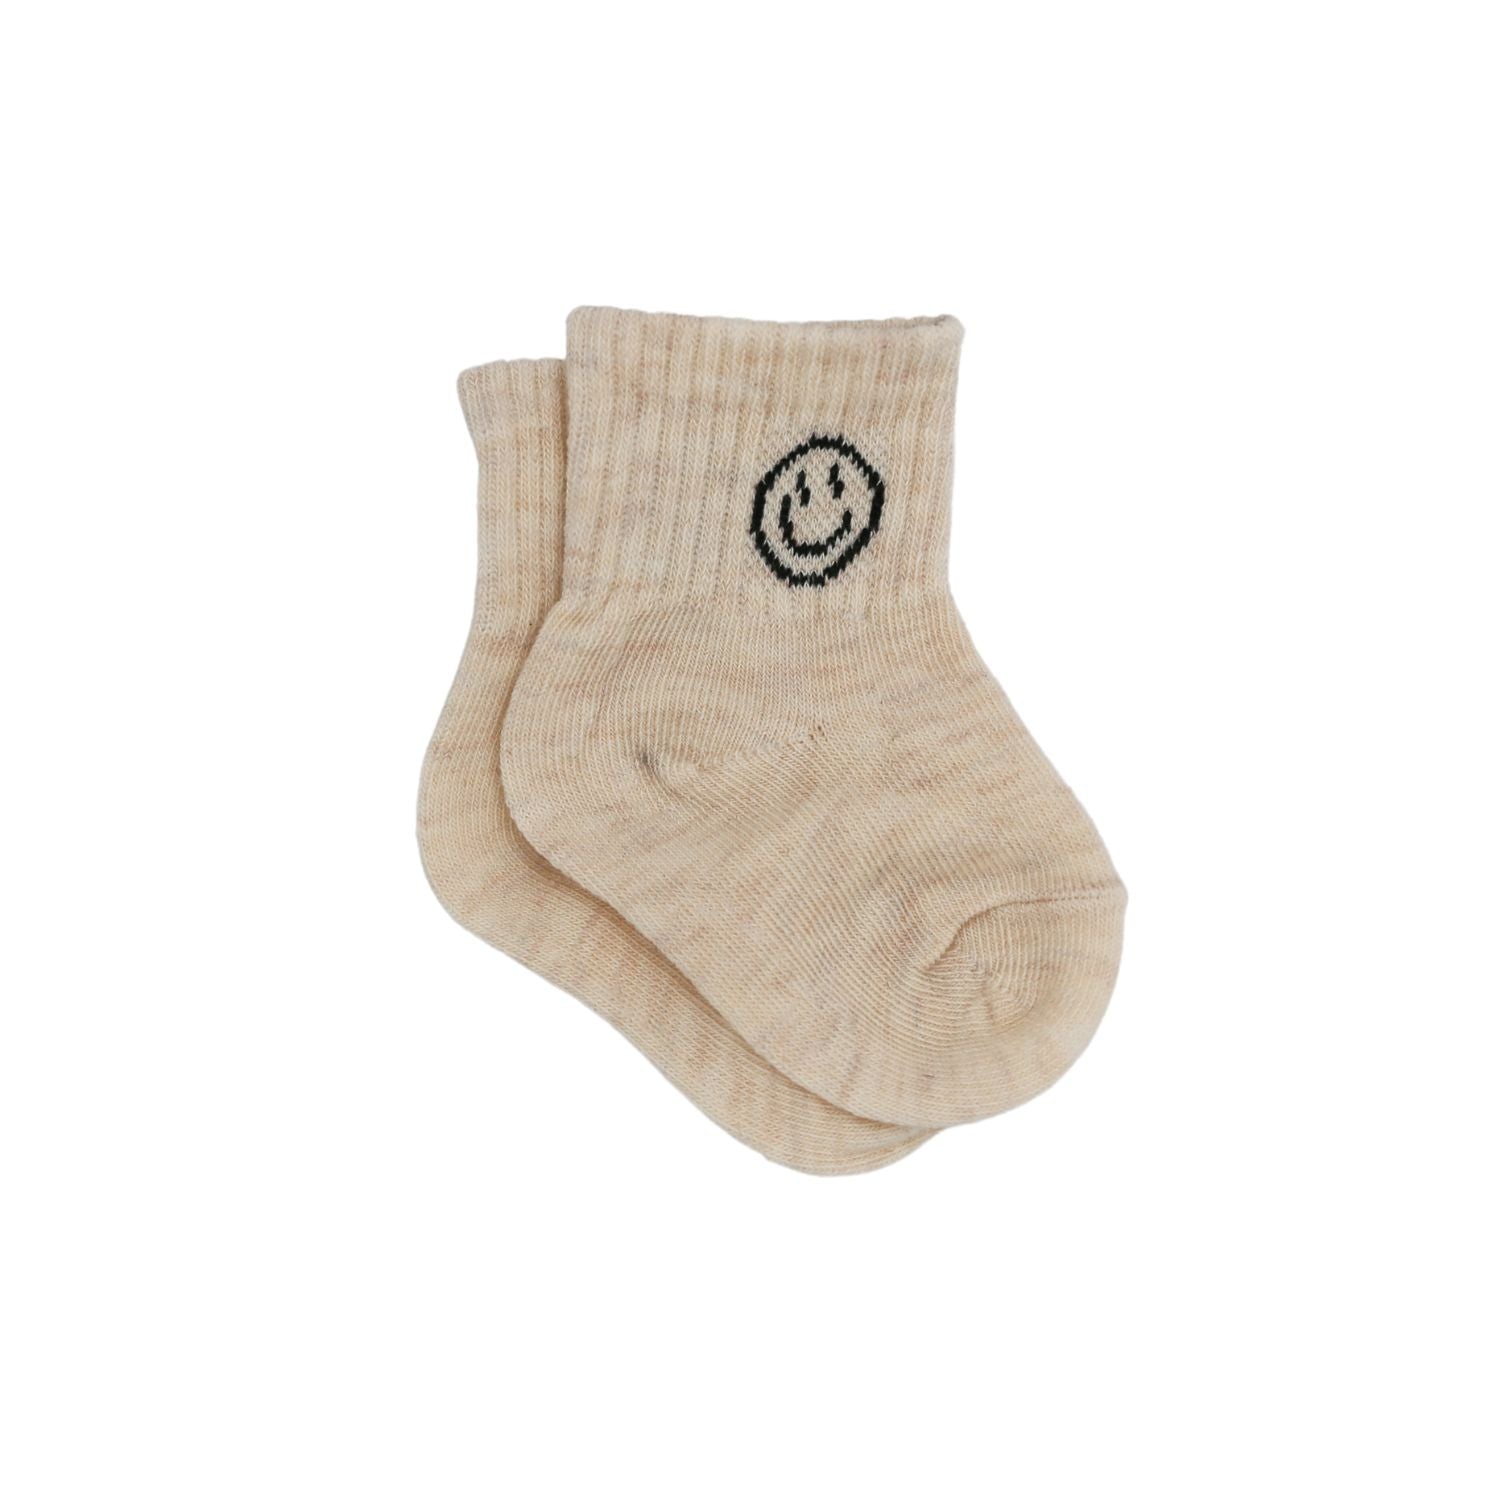 The Baby Cubby Smiling Face Socks - Taupe